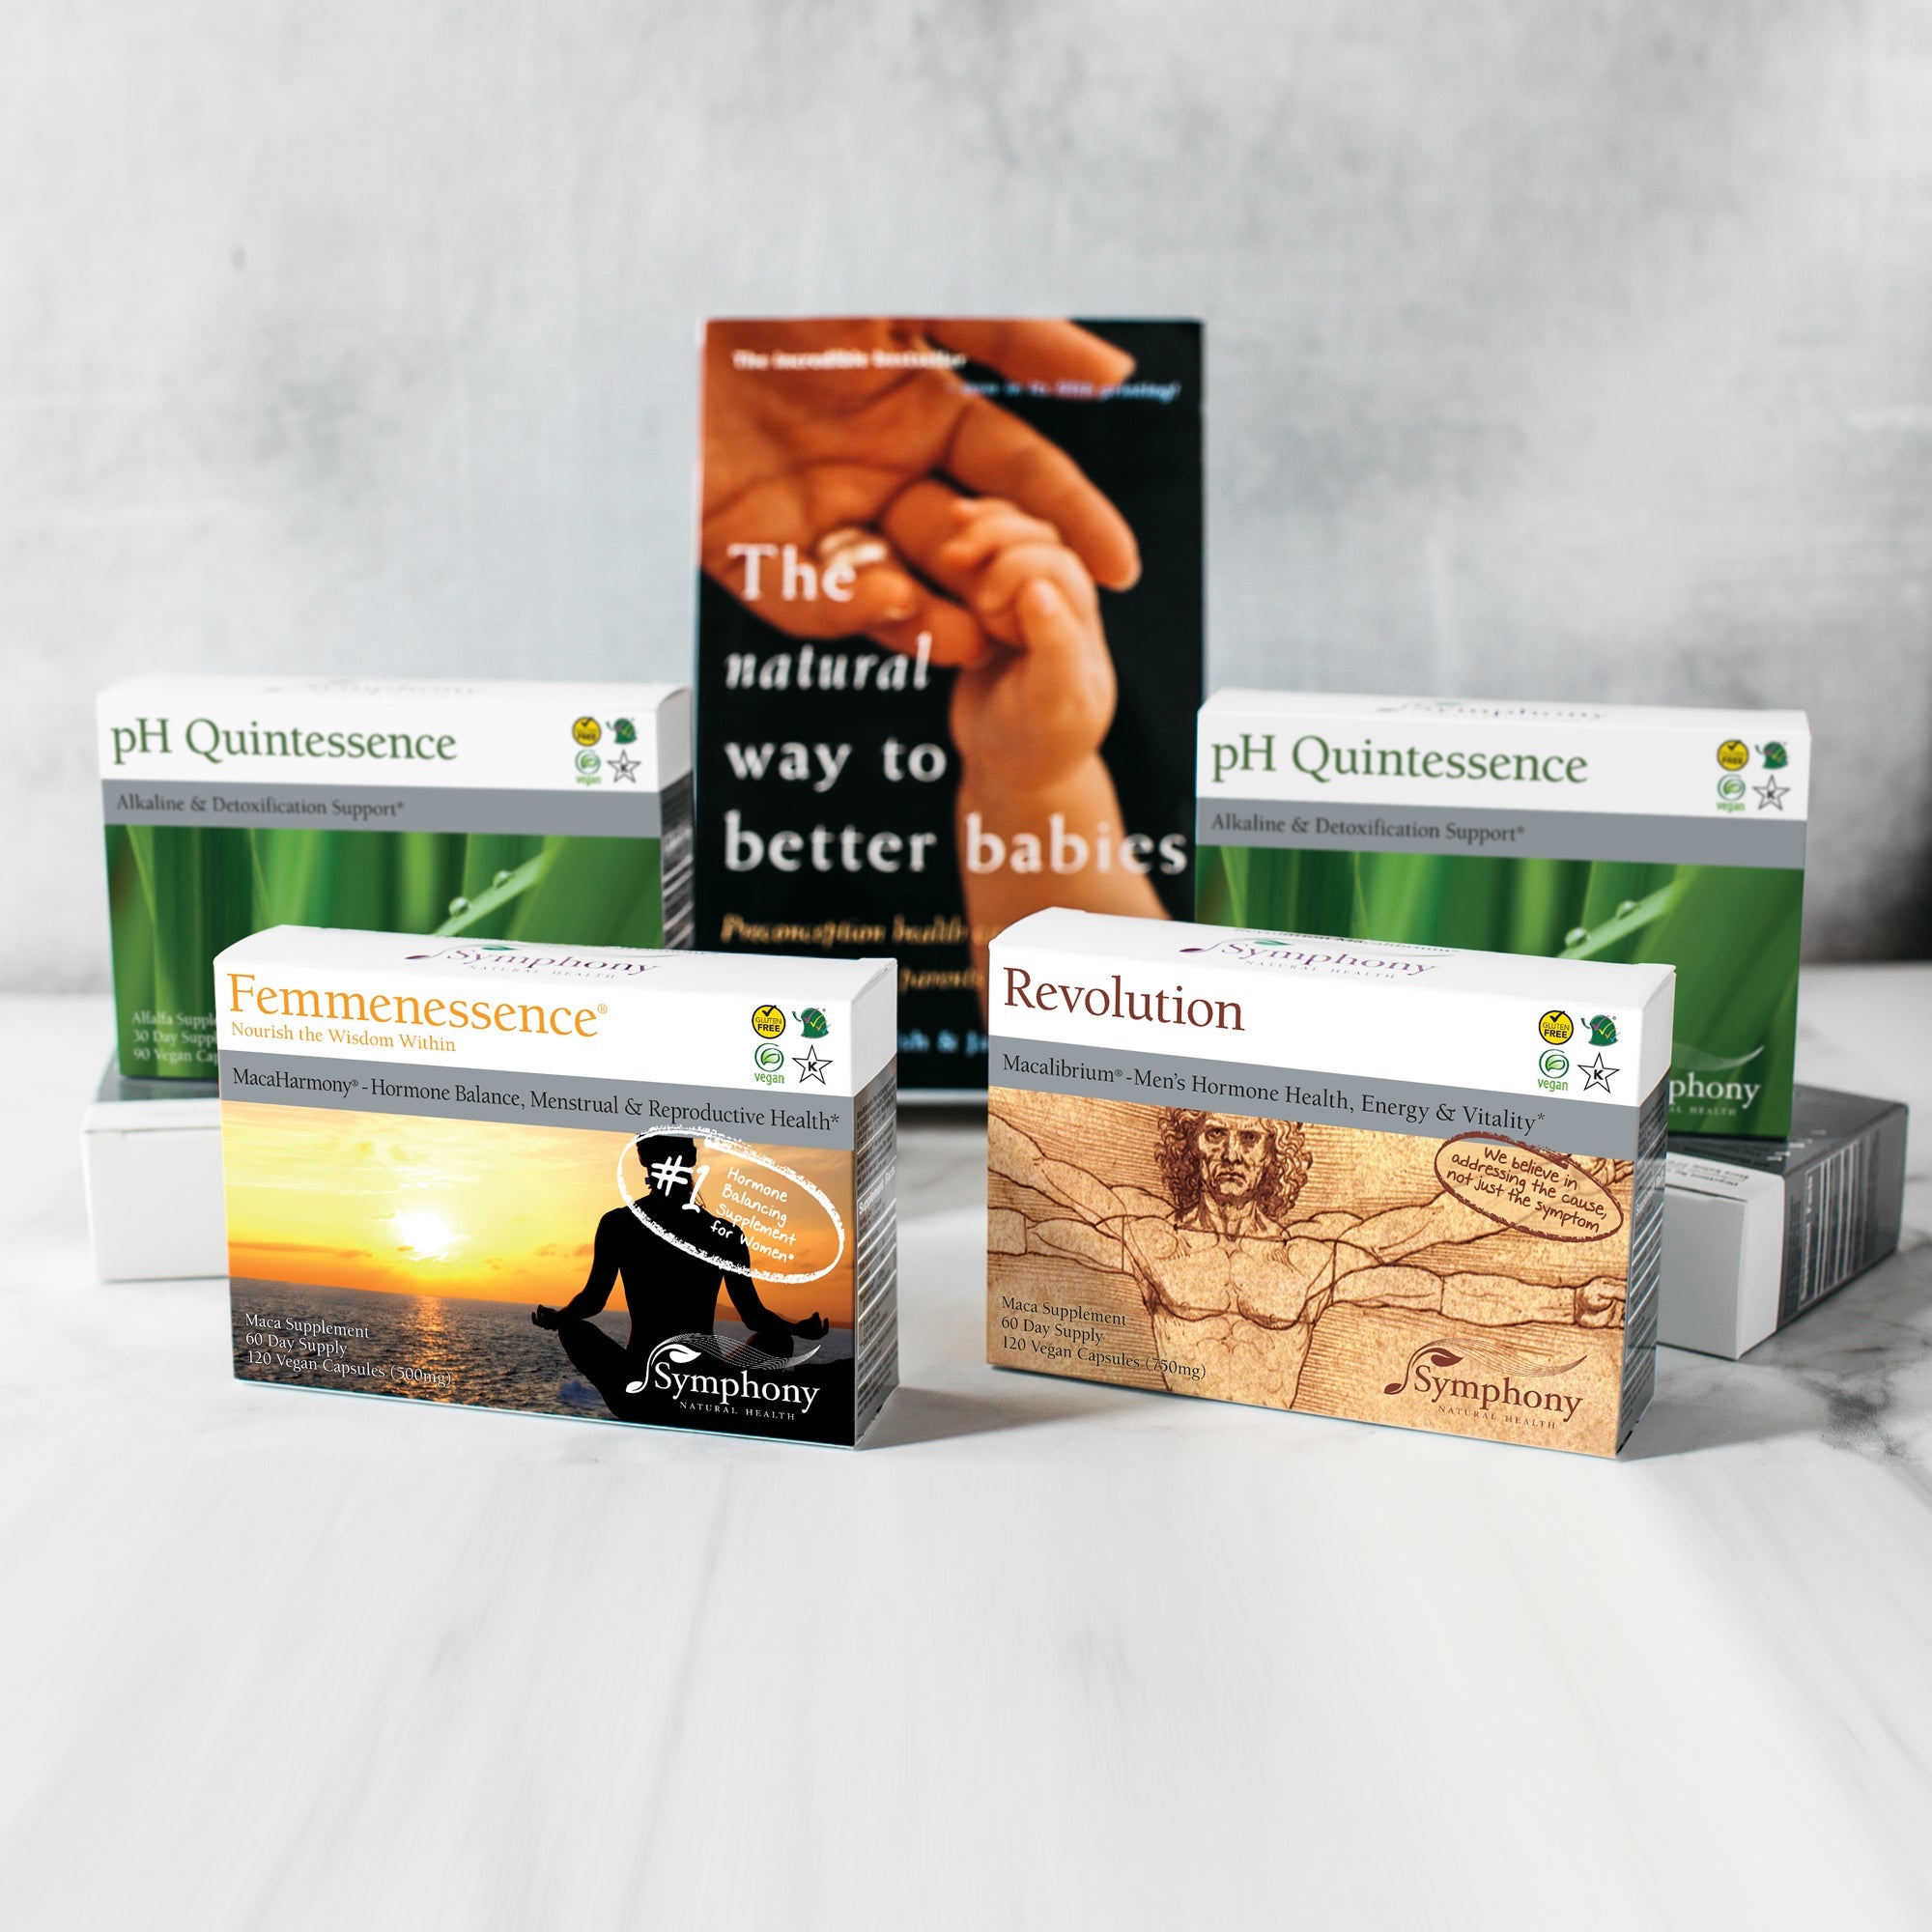 Fertility Preconception Pack one MacaHarmony boxes showing silhouette of woman facing horizon at sunset, one Revolution Macalibrium with Vitruvian Man illustration, we believe in addressing the cause not just the symptom, two ph Quintessence with green leaves with water drops, with leaning book The Natural Way to Better Babies, vegan, gluten free, Kosher, on gray background